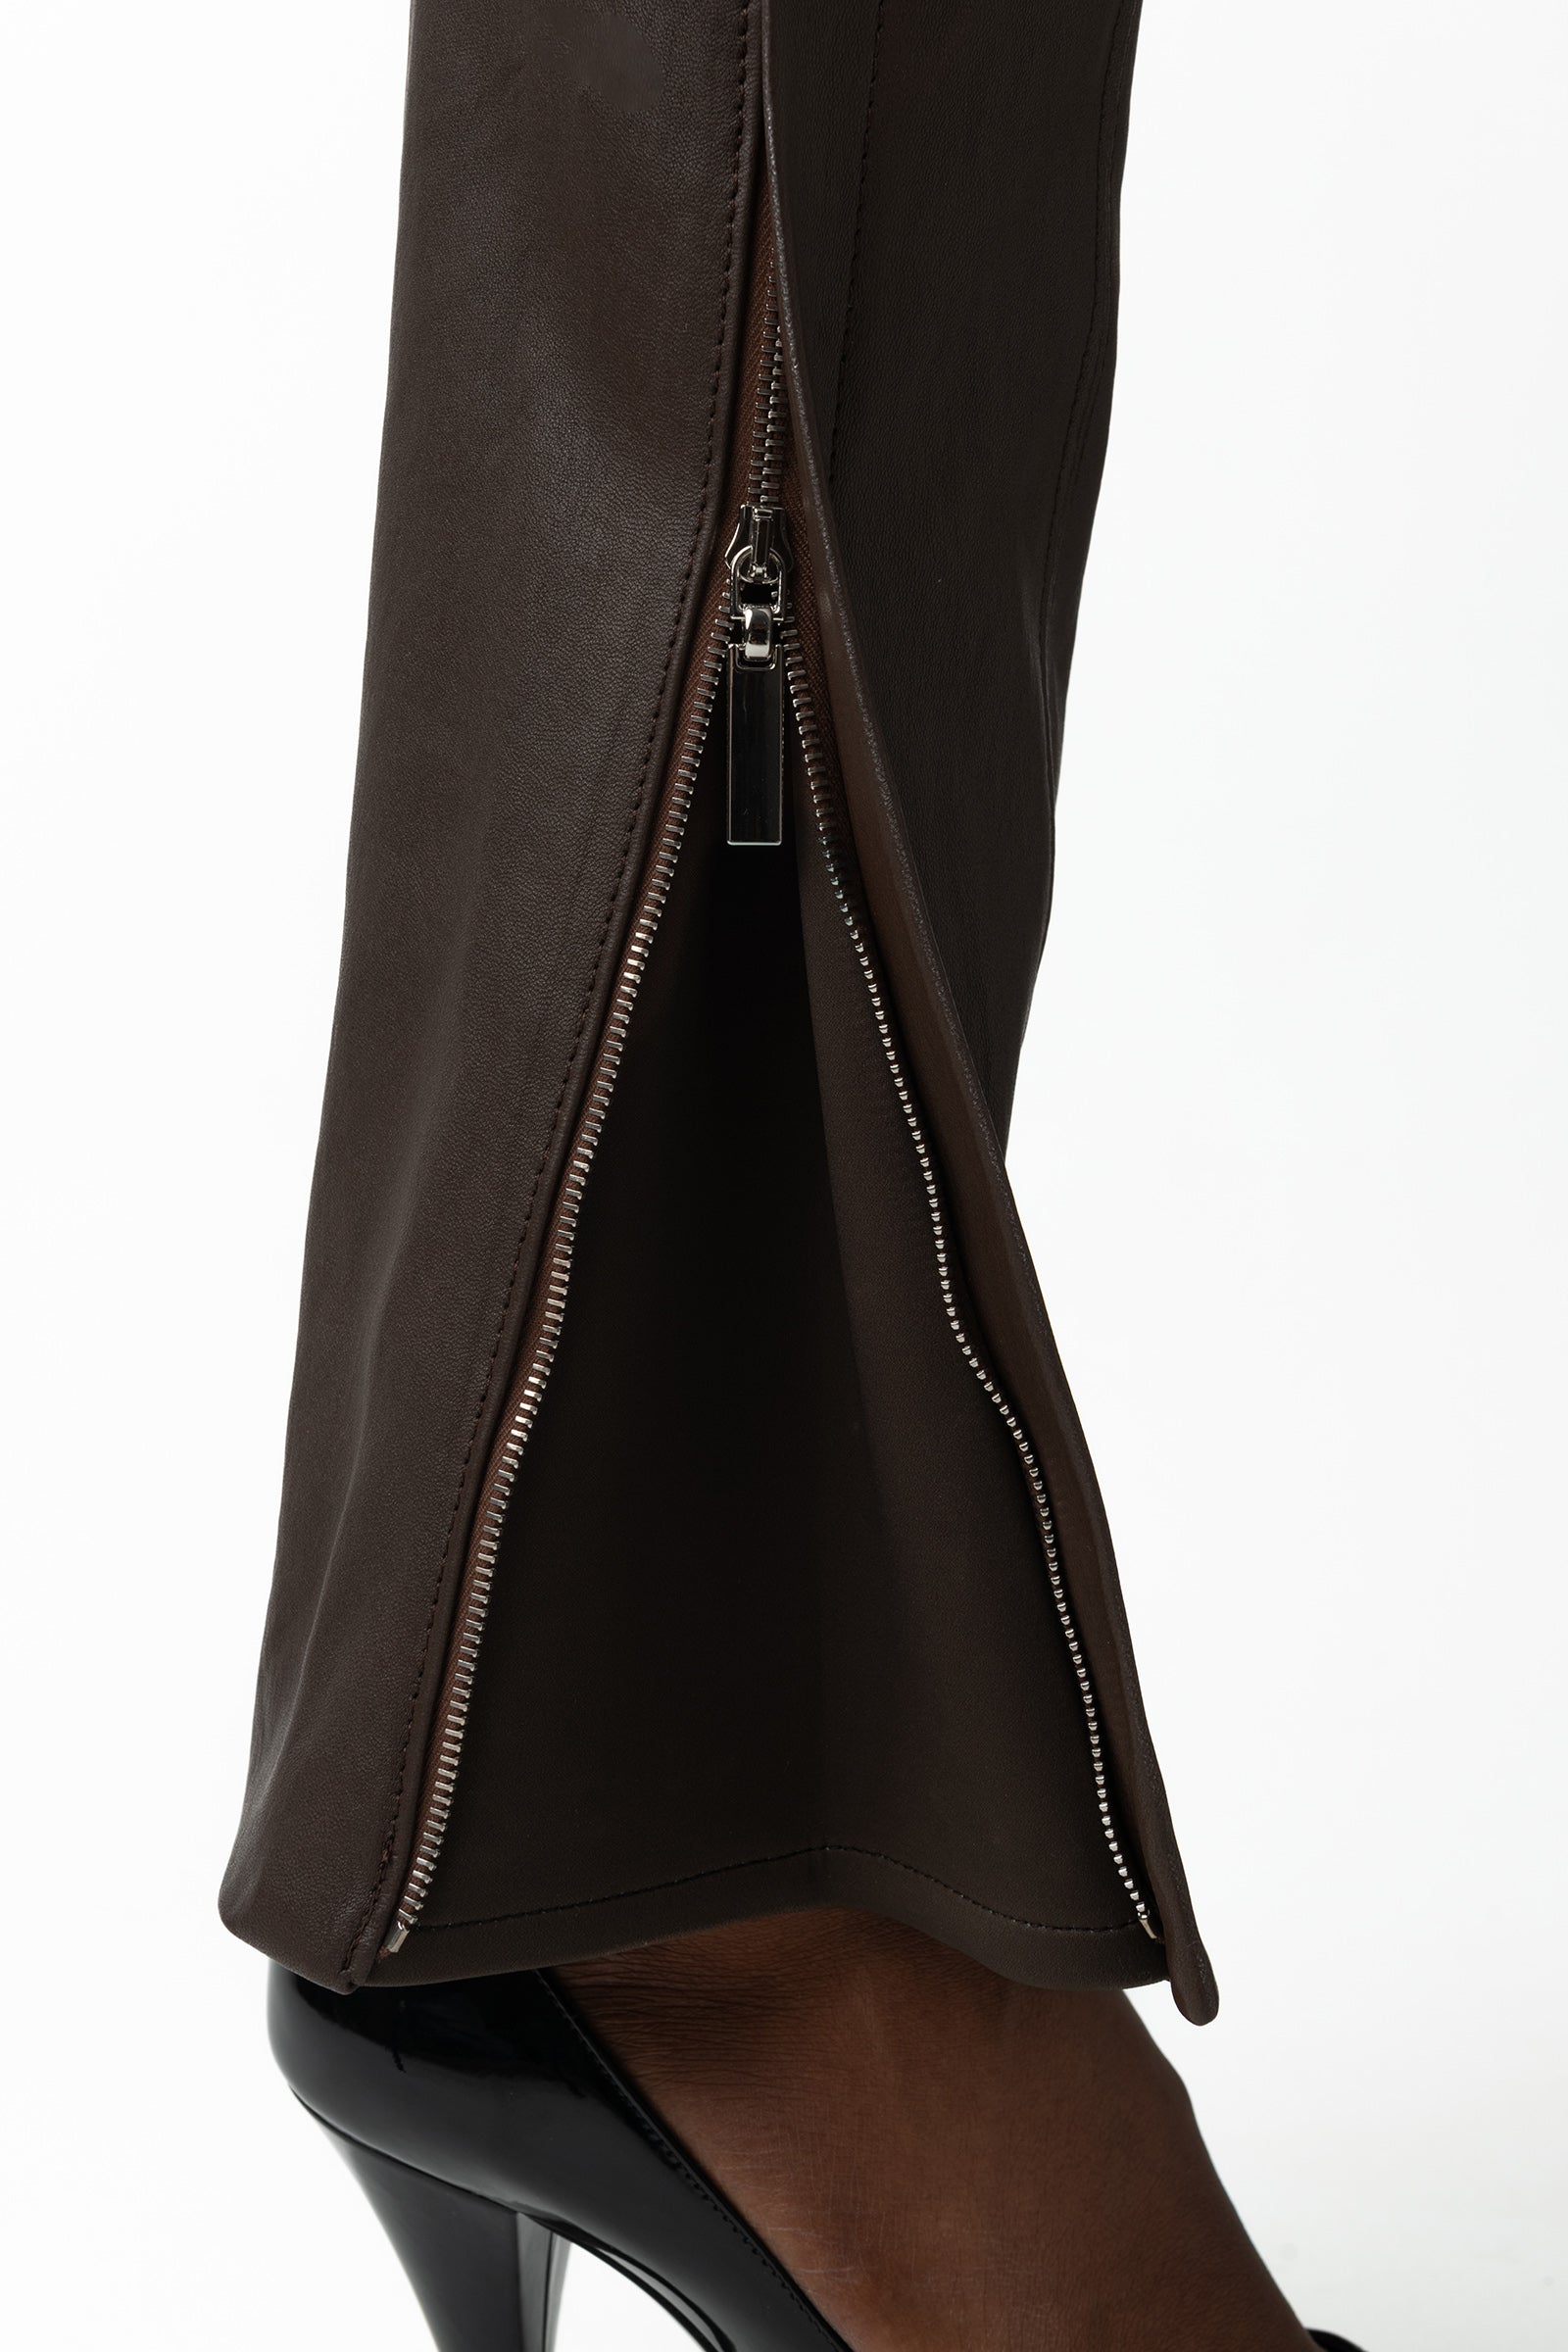 Paige Leather Pant - Chocolate